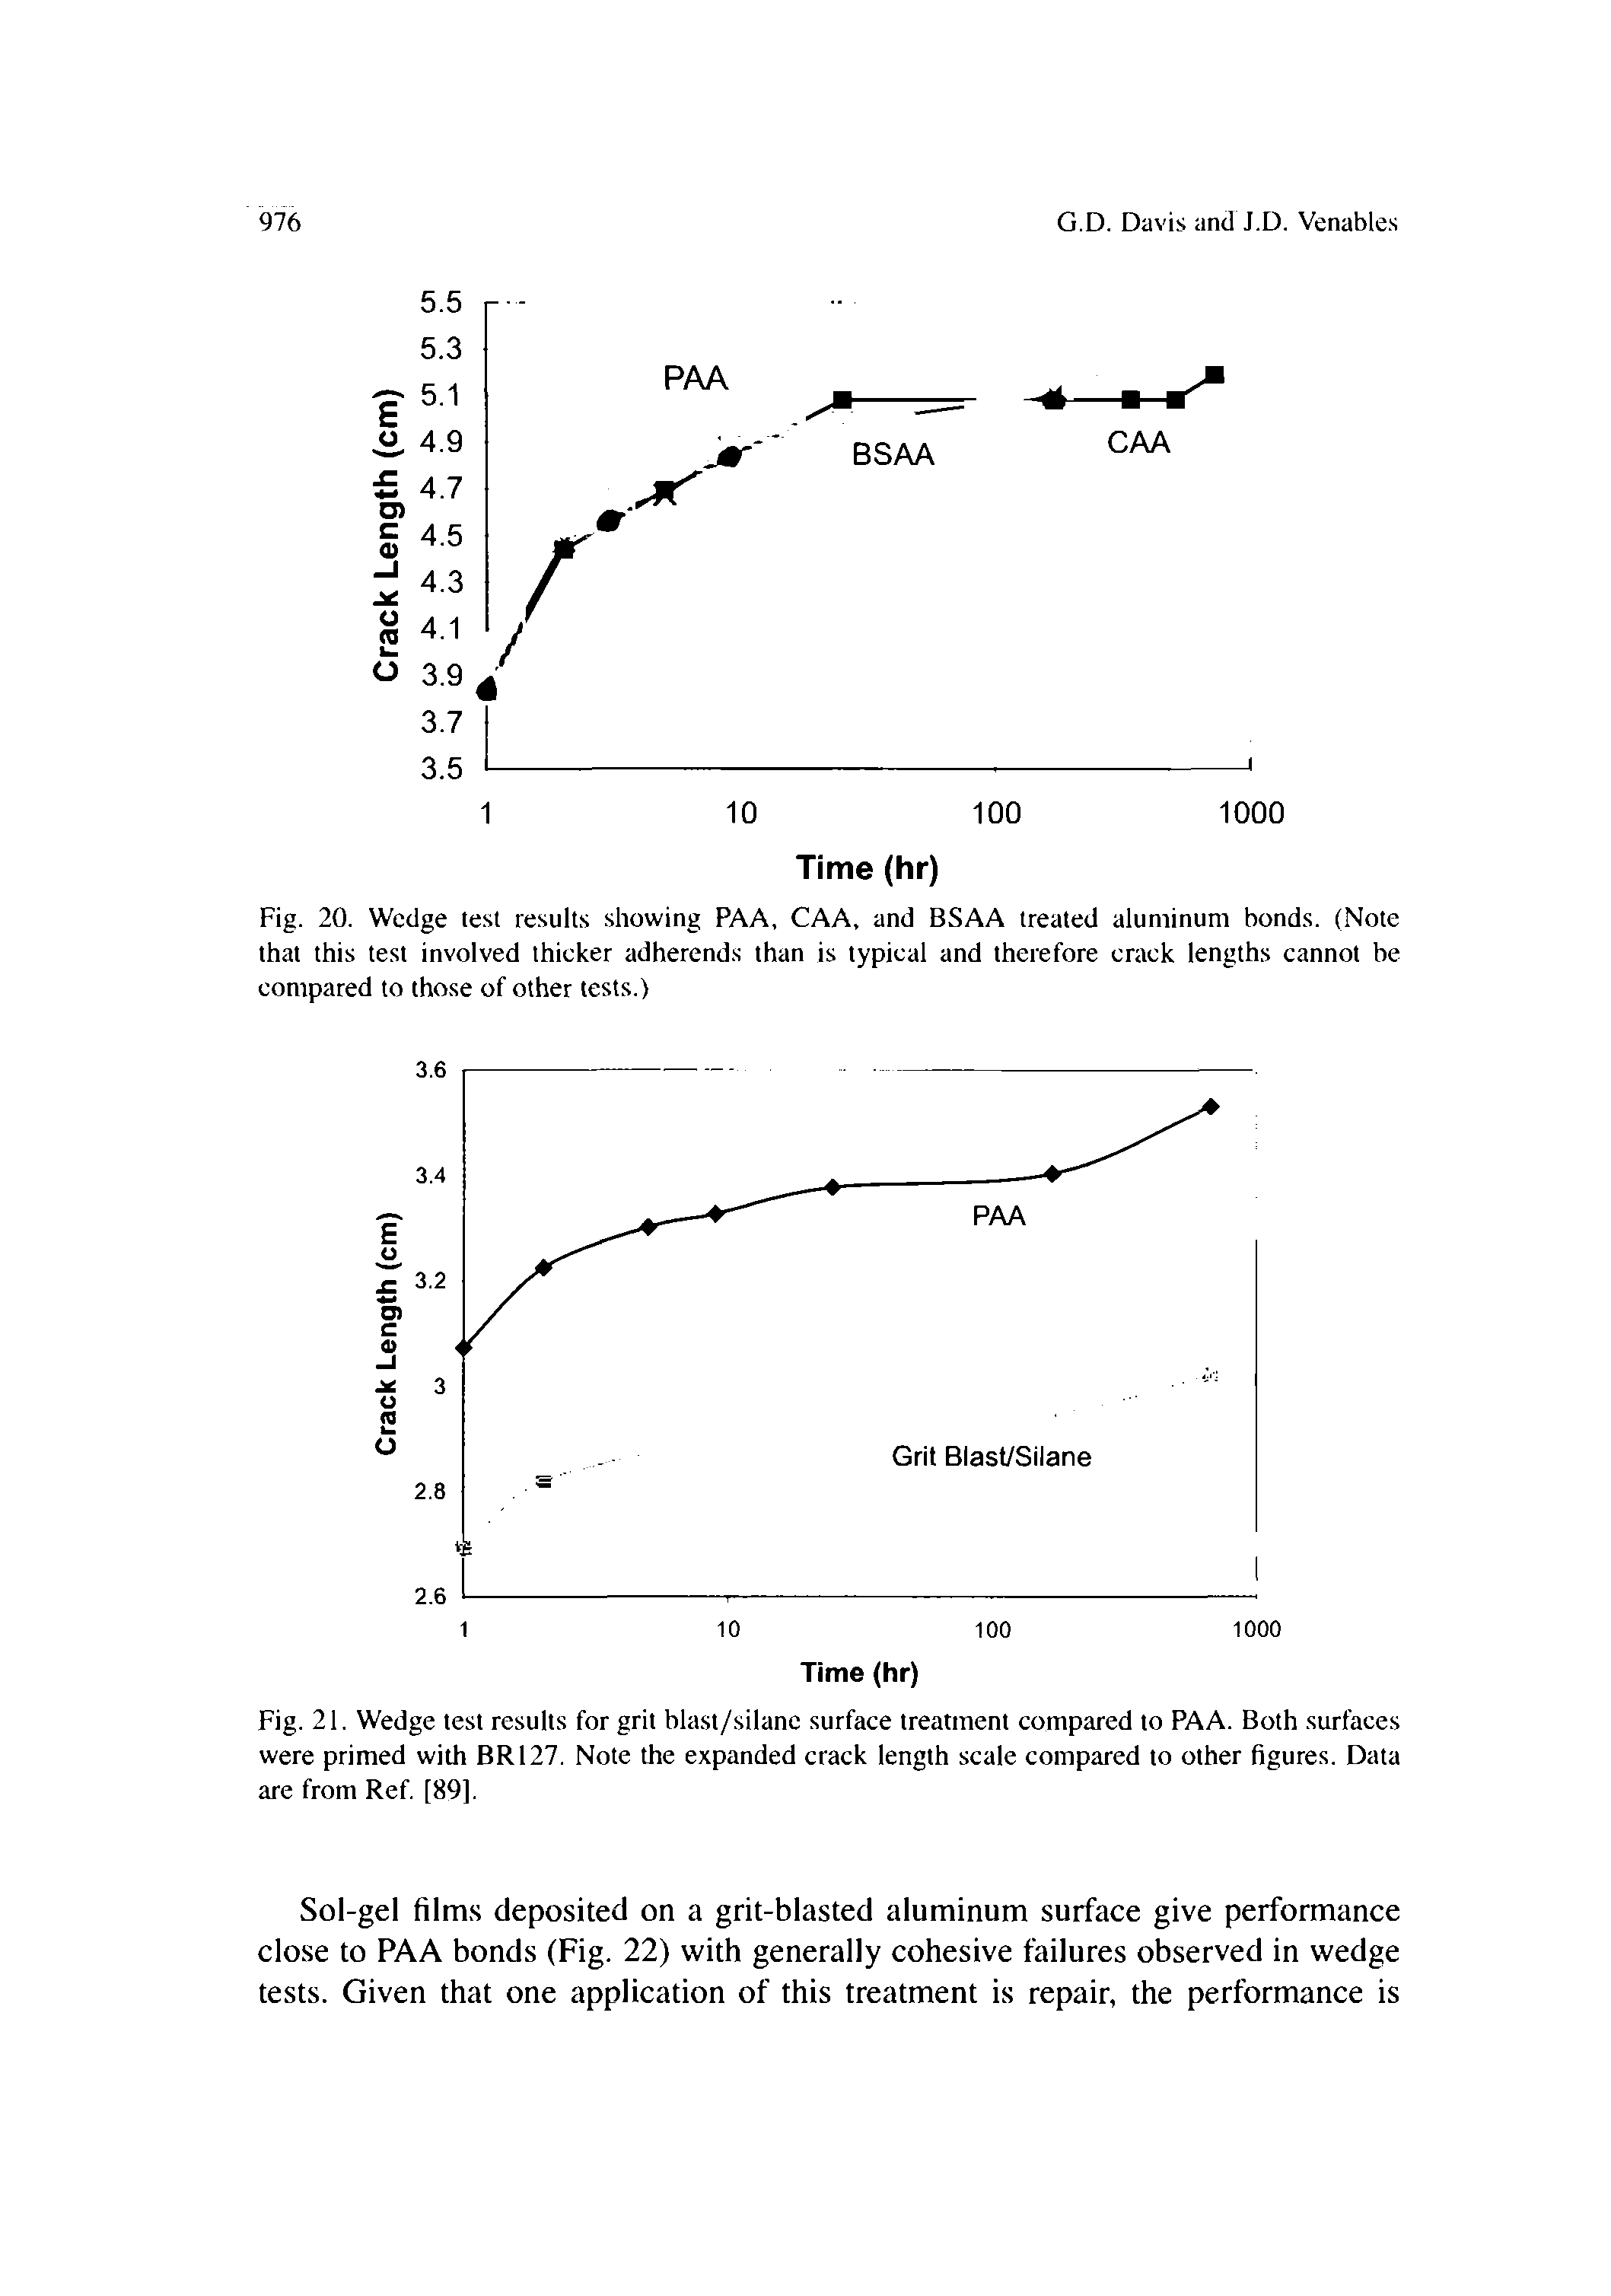 Fig. 20. Wedge test results showing PAA, CAA, and BSAA treated aluminum bonds. (Note that this test involved thicker adherends than is typical and therefore crack lengths cannot be compared to those of other tests.)...